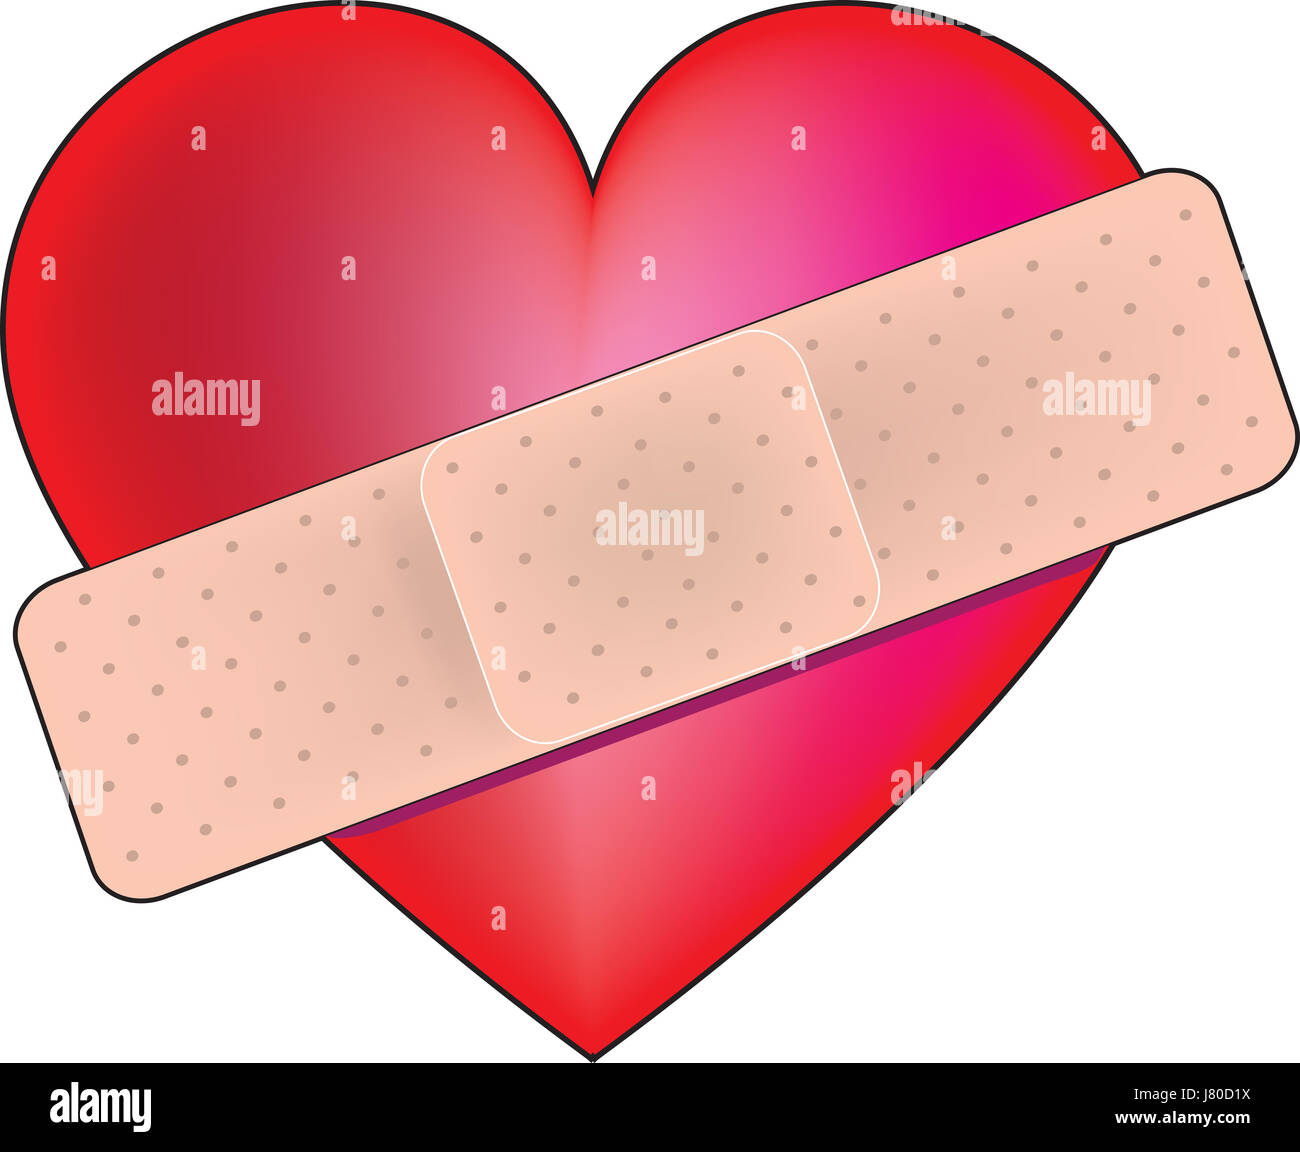 pain bandage wound hurt love in love fell in love heart red pain illustration Stock Photo